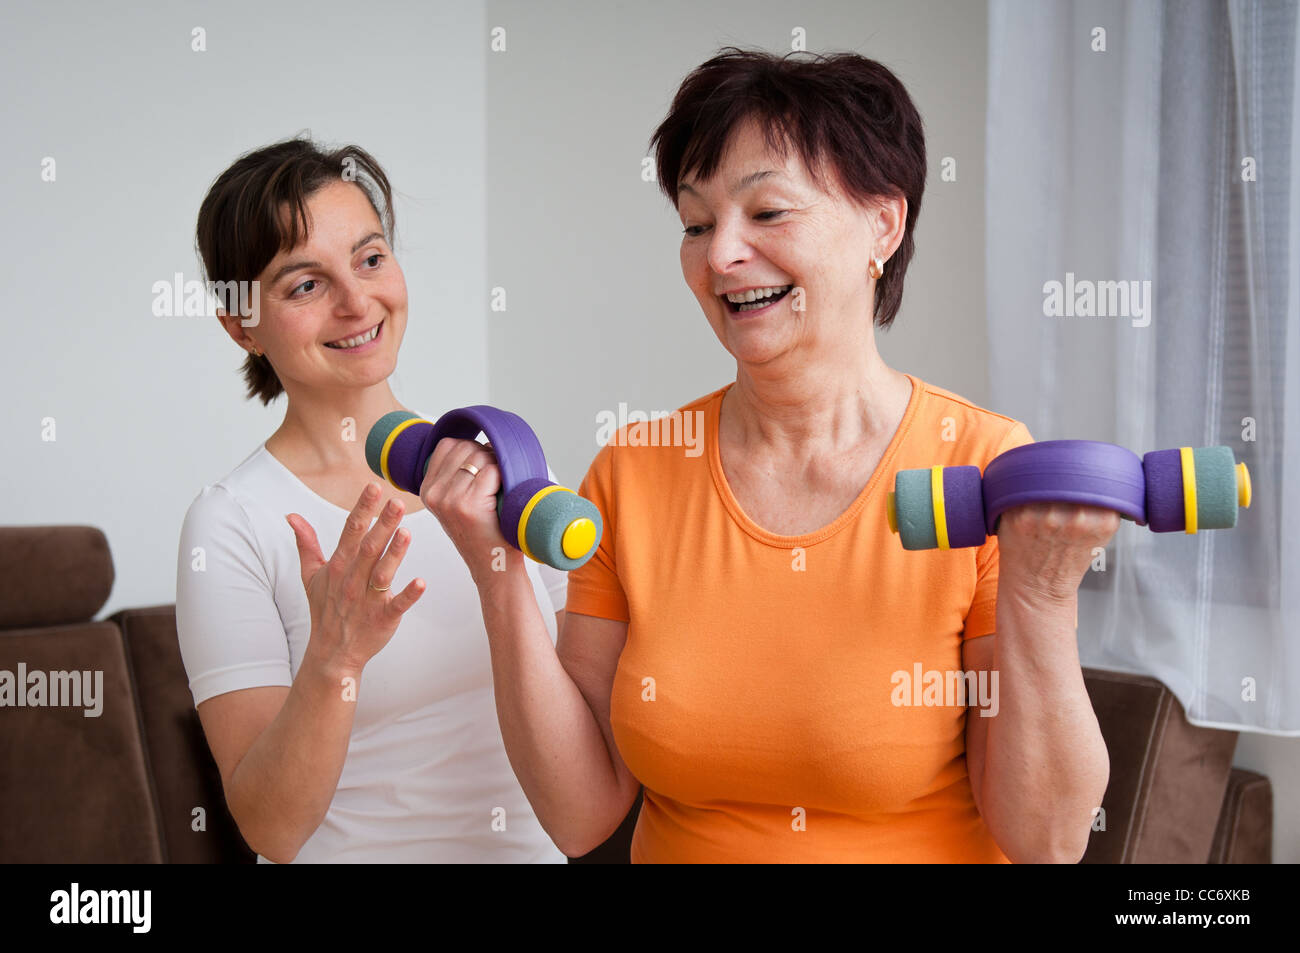 Coach assisting senior woman exercising with barbells Stock Photo